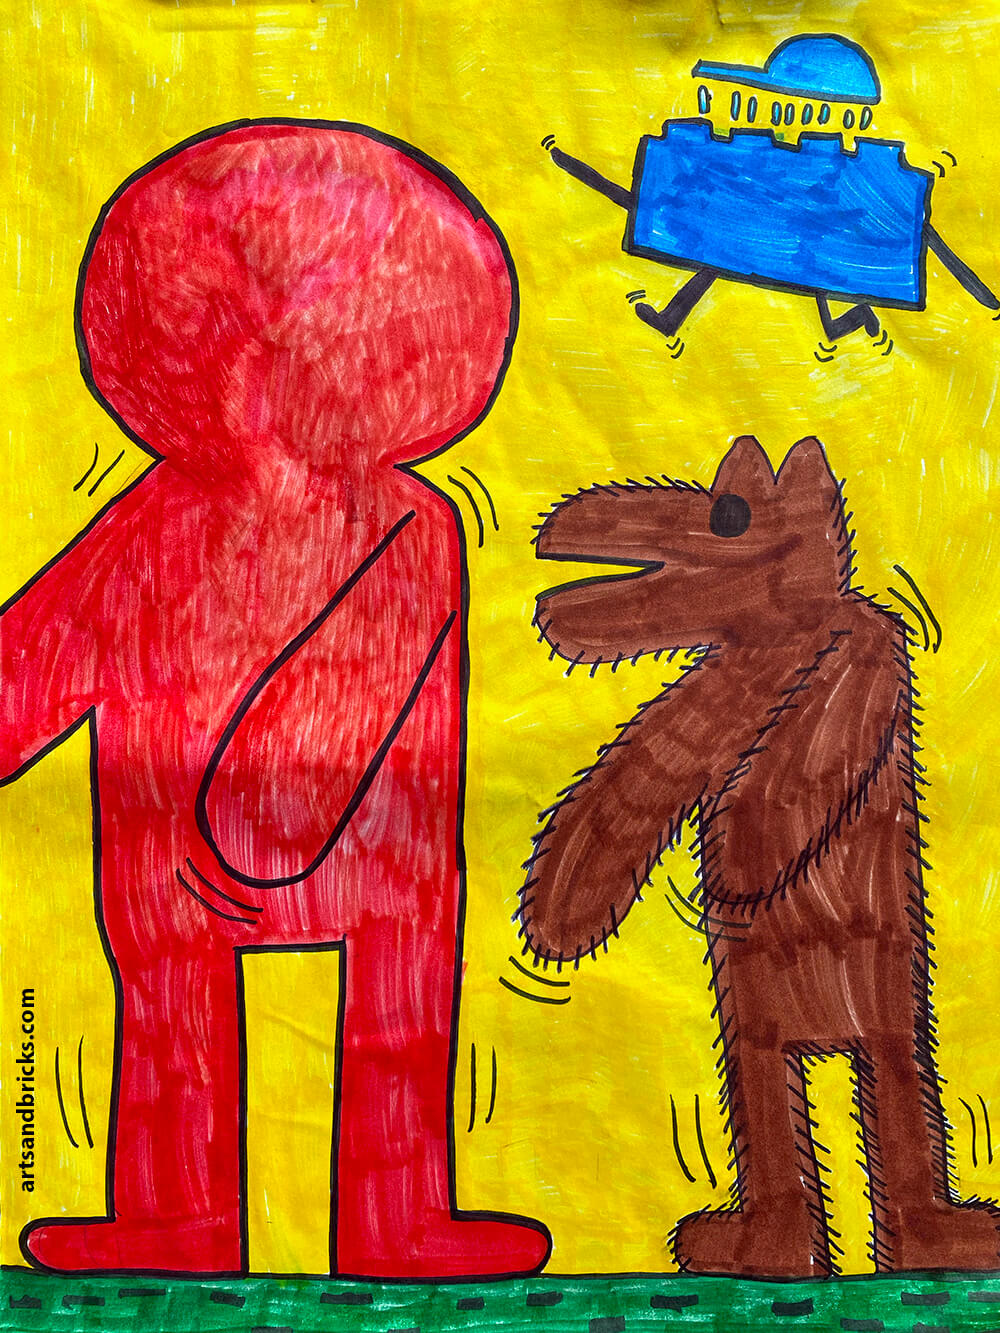 Get inspiration for a Keith Haring-inspired Kids Art Project. Learn what characteristics make Keith's work unique -- like motion lines, bright solid colors and cartoon styled faceless people. Our final artwork includes our very own The Hairy Dog, The Dancing Boy and The Blue Lego Brick.